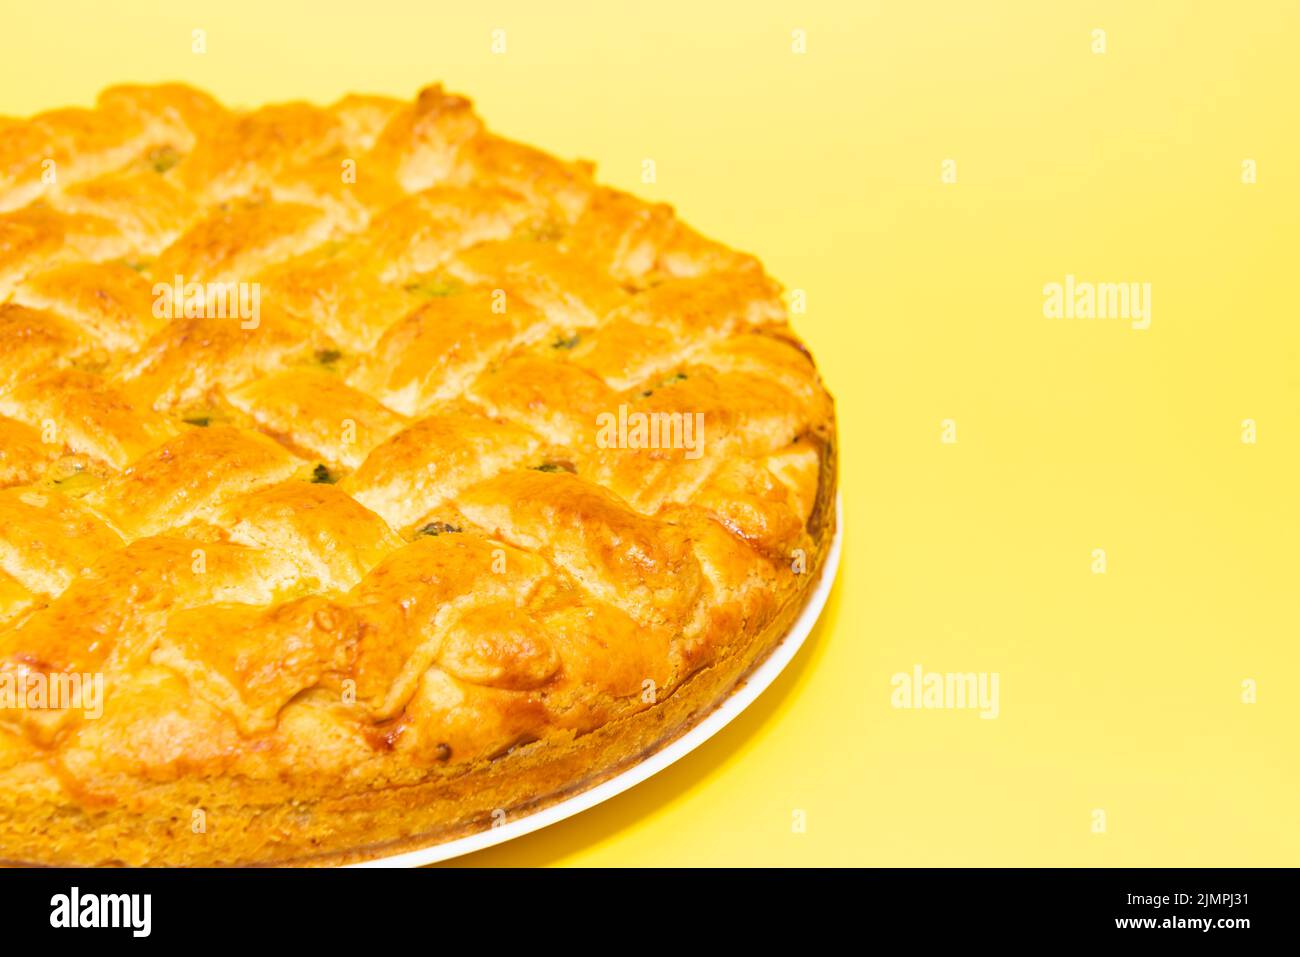 American pie with baked crust Stock Photo